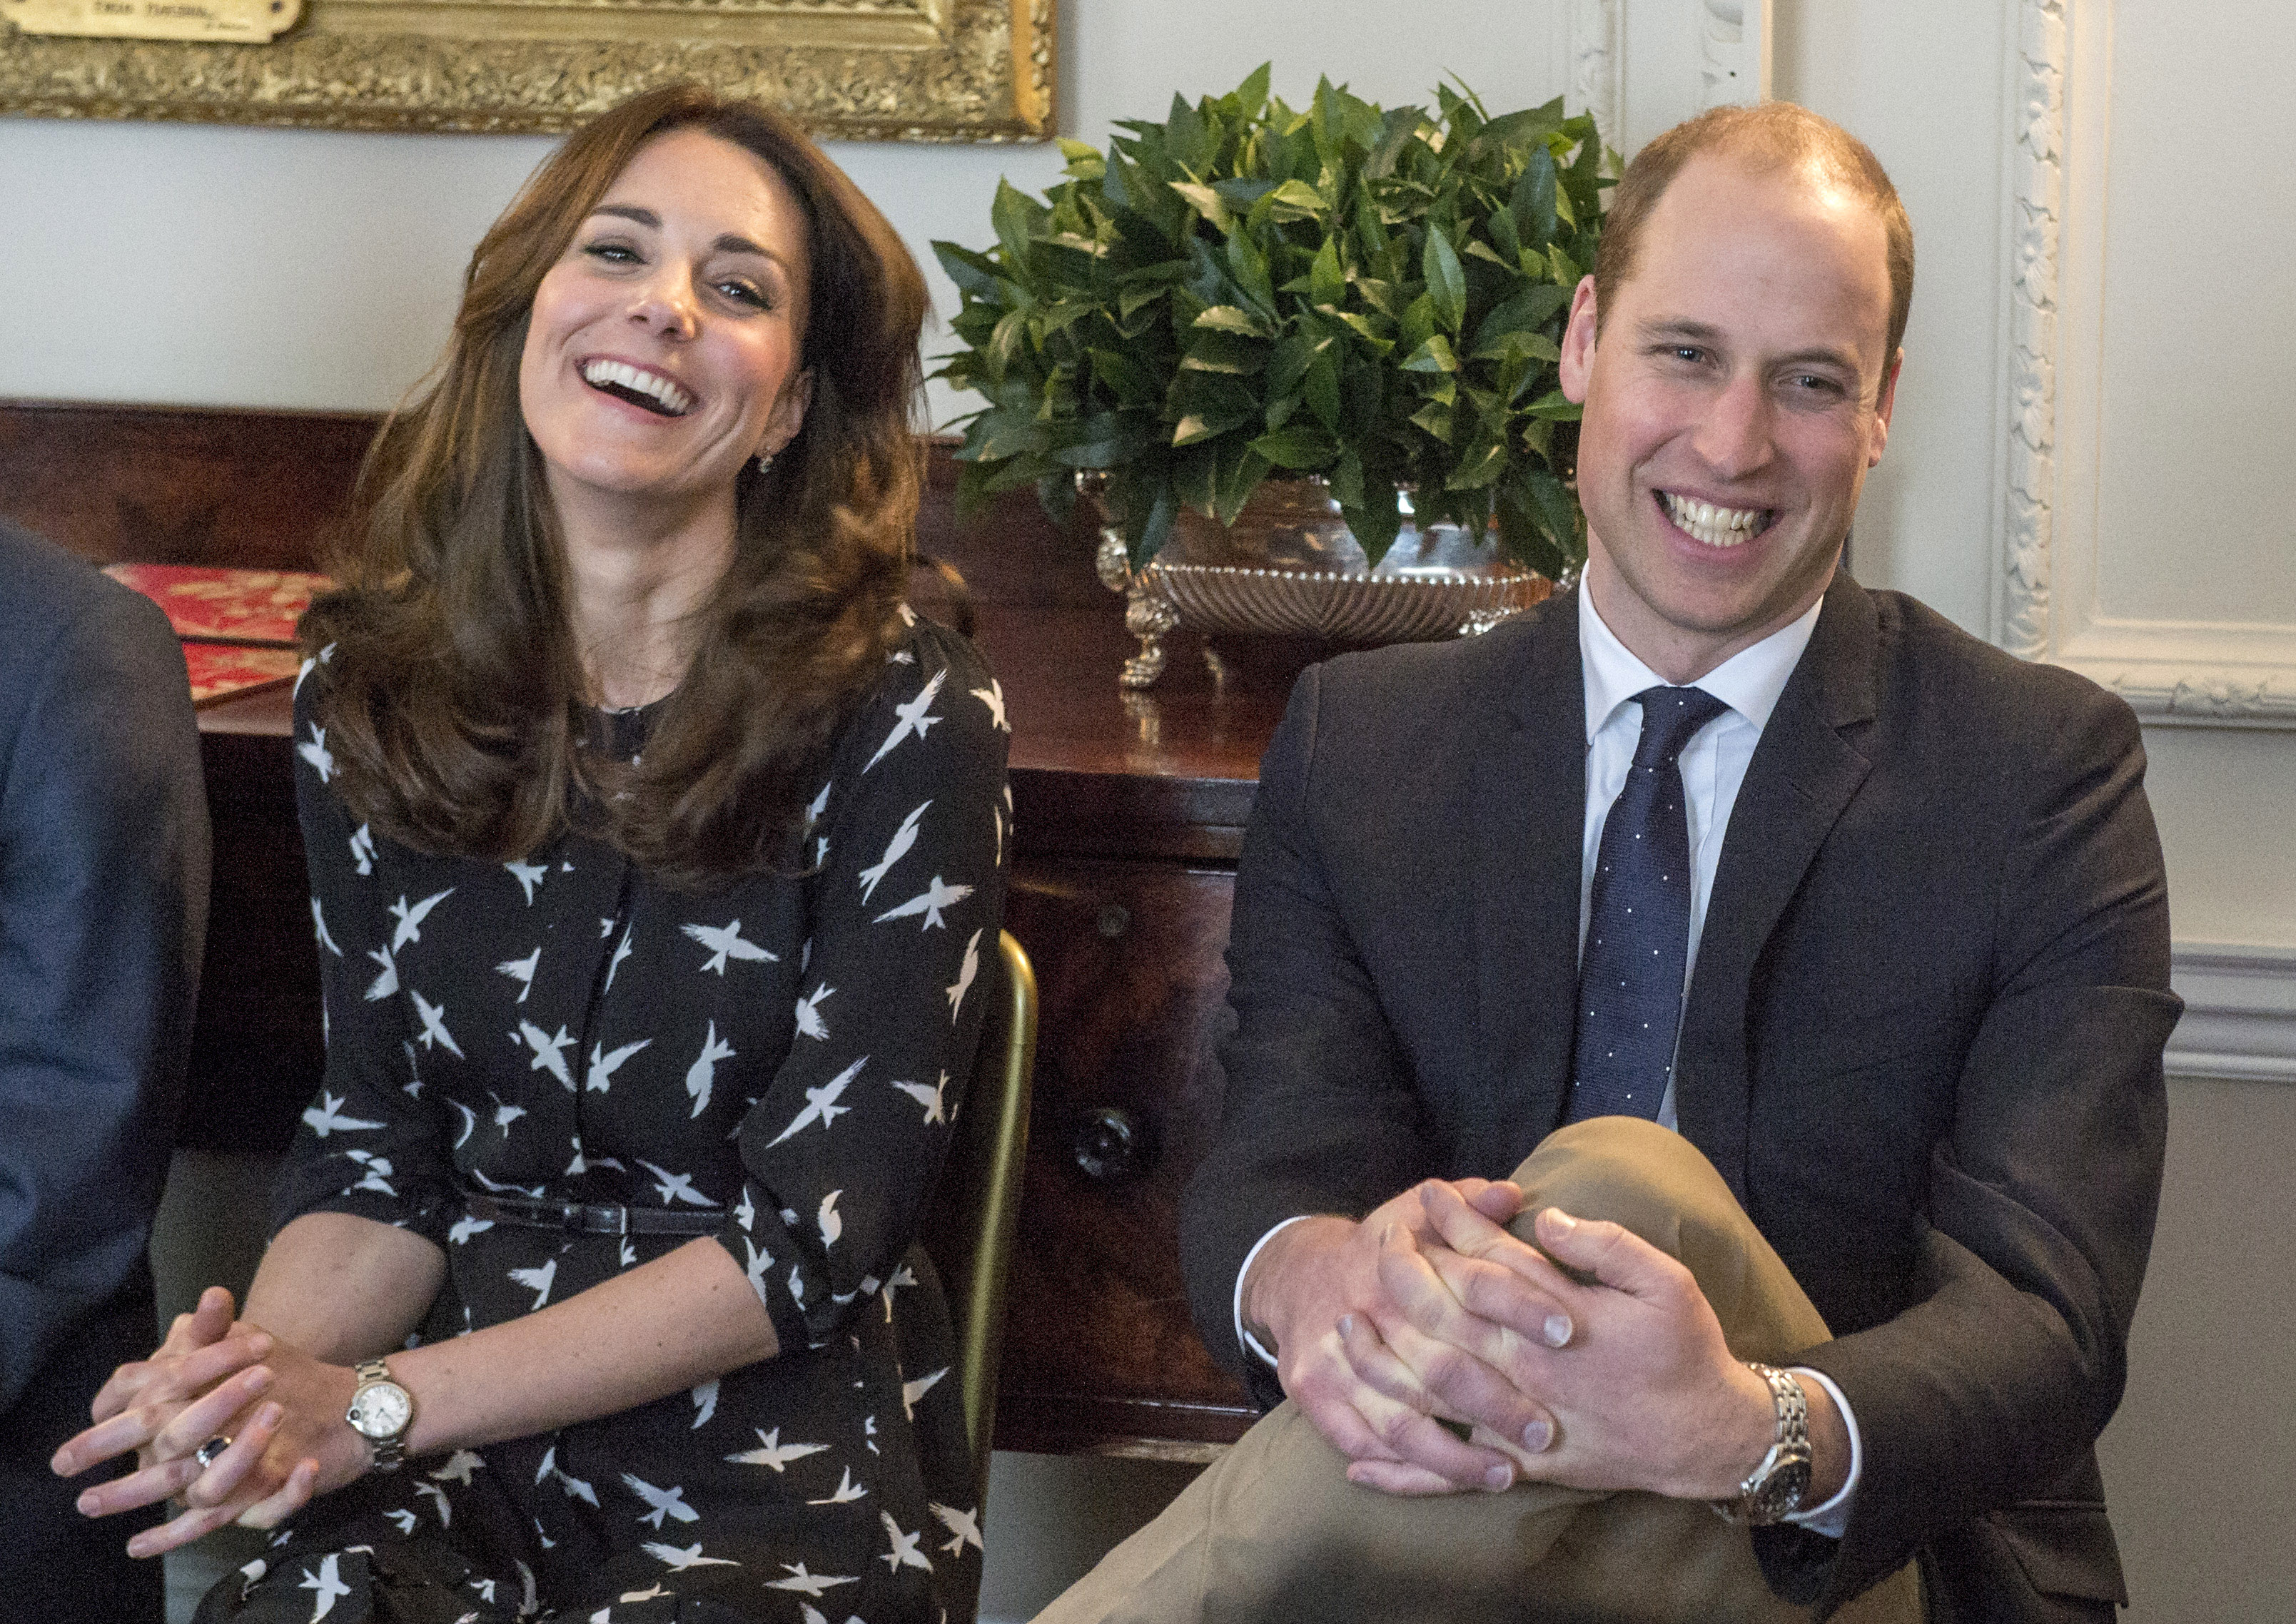 Catherine, Duchess of Cambridge and Prince William, Duke of Cambridge  met with Jonny Benjamin and Neil Laybourn at  Kensington Palace on March 10, 2016 in London, United Kingdom. (Arthur Edwards —WPA Pool/Getty Images)